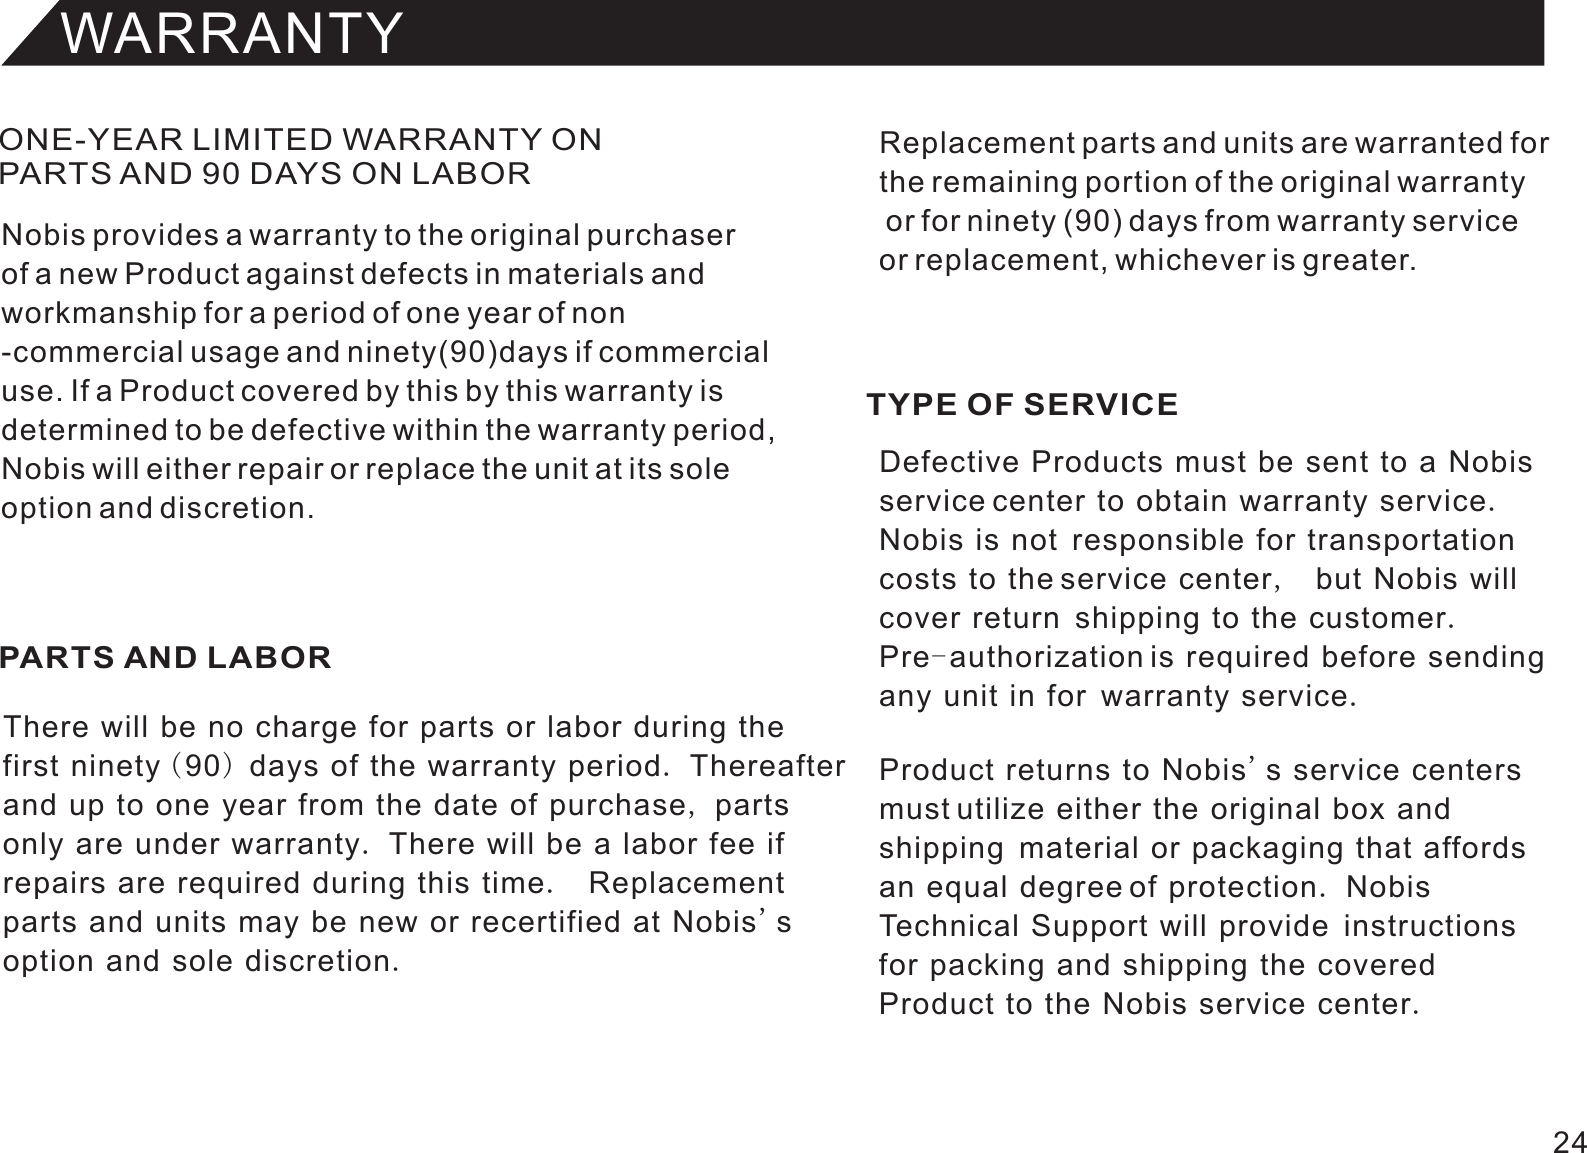 WARRANTYONE-YEAR LIMITED WARRANTY ON PARTS AND 90 DAYS ON LABORPARTS AND LABOR TYPE OF SERVICENobis provides a warranty to the original purchaserof a new Product against defects in materials andworkmanship for a period of one year of non-commercial usage and ninety(90)days if commercialuse. If a Product covered by this by this warranty isdetermined to be defective within the warranty period,Nobis will either repair or replace the unit at its soleoption and discretion.There will be no charge for parts or labor during thefirst ninety (90) days of the warranty period. Thereafterand up to one year from the date of purchase, partsonly are under warranty. There will be a labor fee ifrepairs are required during this time.  Replacementparts and units may be new or recertified at Nobis&apos;soption and sole discretion.Defective Products must be sent to a Nobis service center to obtain warranty service.Nobis is not  responsible for transportationcosts to the service center,  but Nobis will cover return  shipping to the customer.Pre-authorization is required before sendingany unit in for  warranty service.Product returns to Nobis&apos;s service centers must utilize either the original box andshipping  material or packaging that affords an equal degree of protection. Nobis Technical Support will provide  instructionsfor packing and shipping the coveredProduct to the Nobis service center.Replacement parts and units are warranted forthe remaining portion of the original warranty or for ninety (90) days from warranty service or replacement, whichever is greater.24